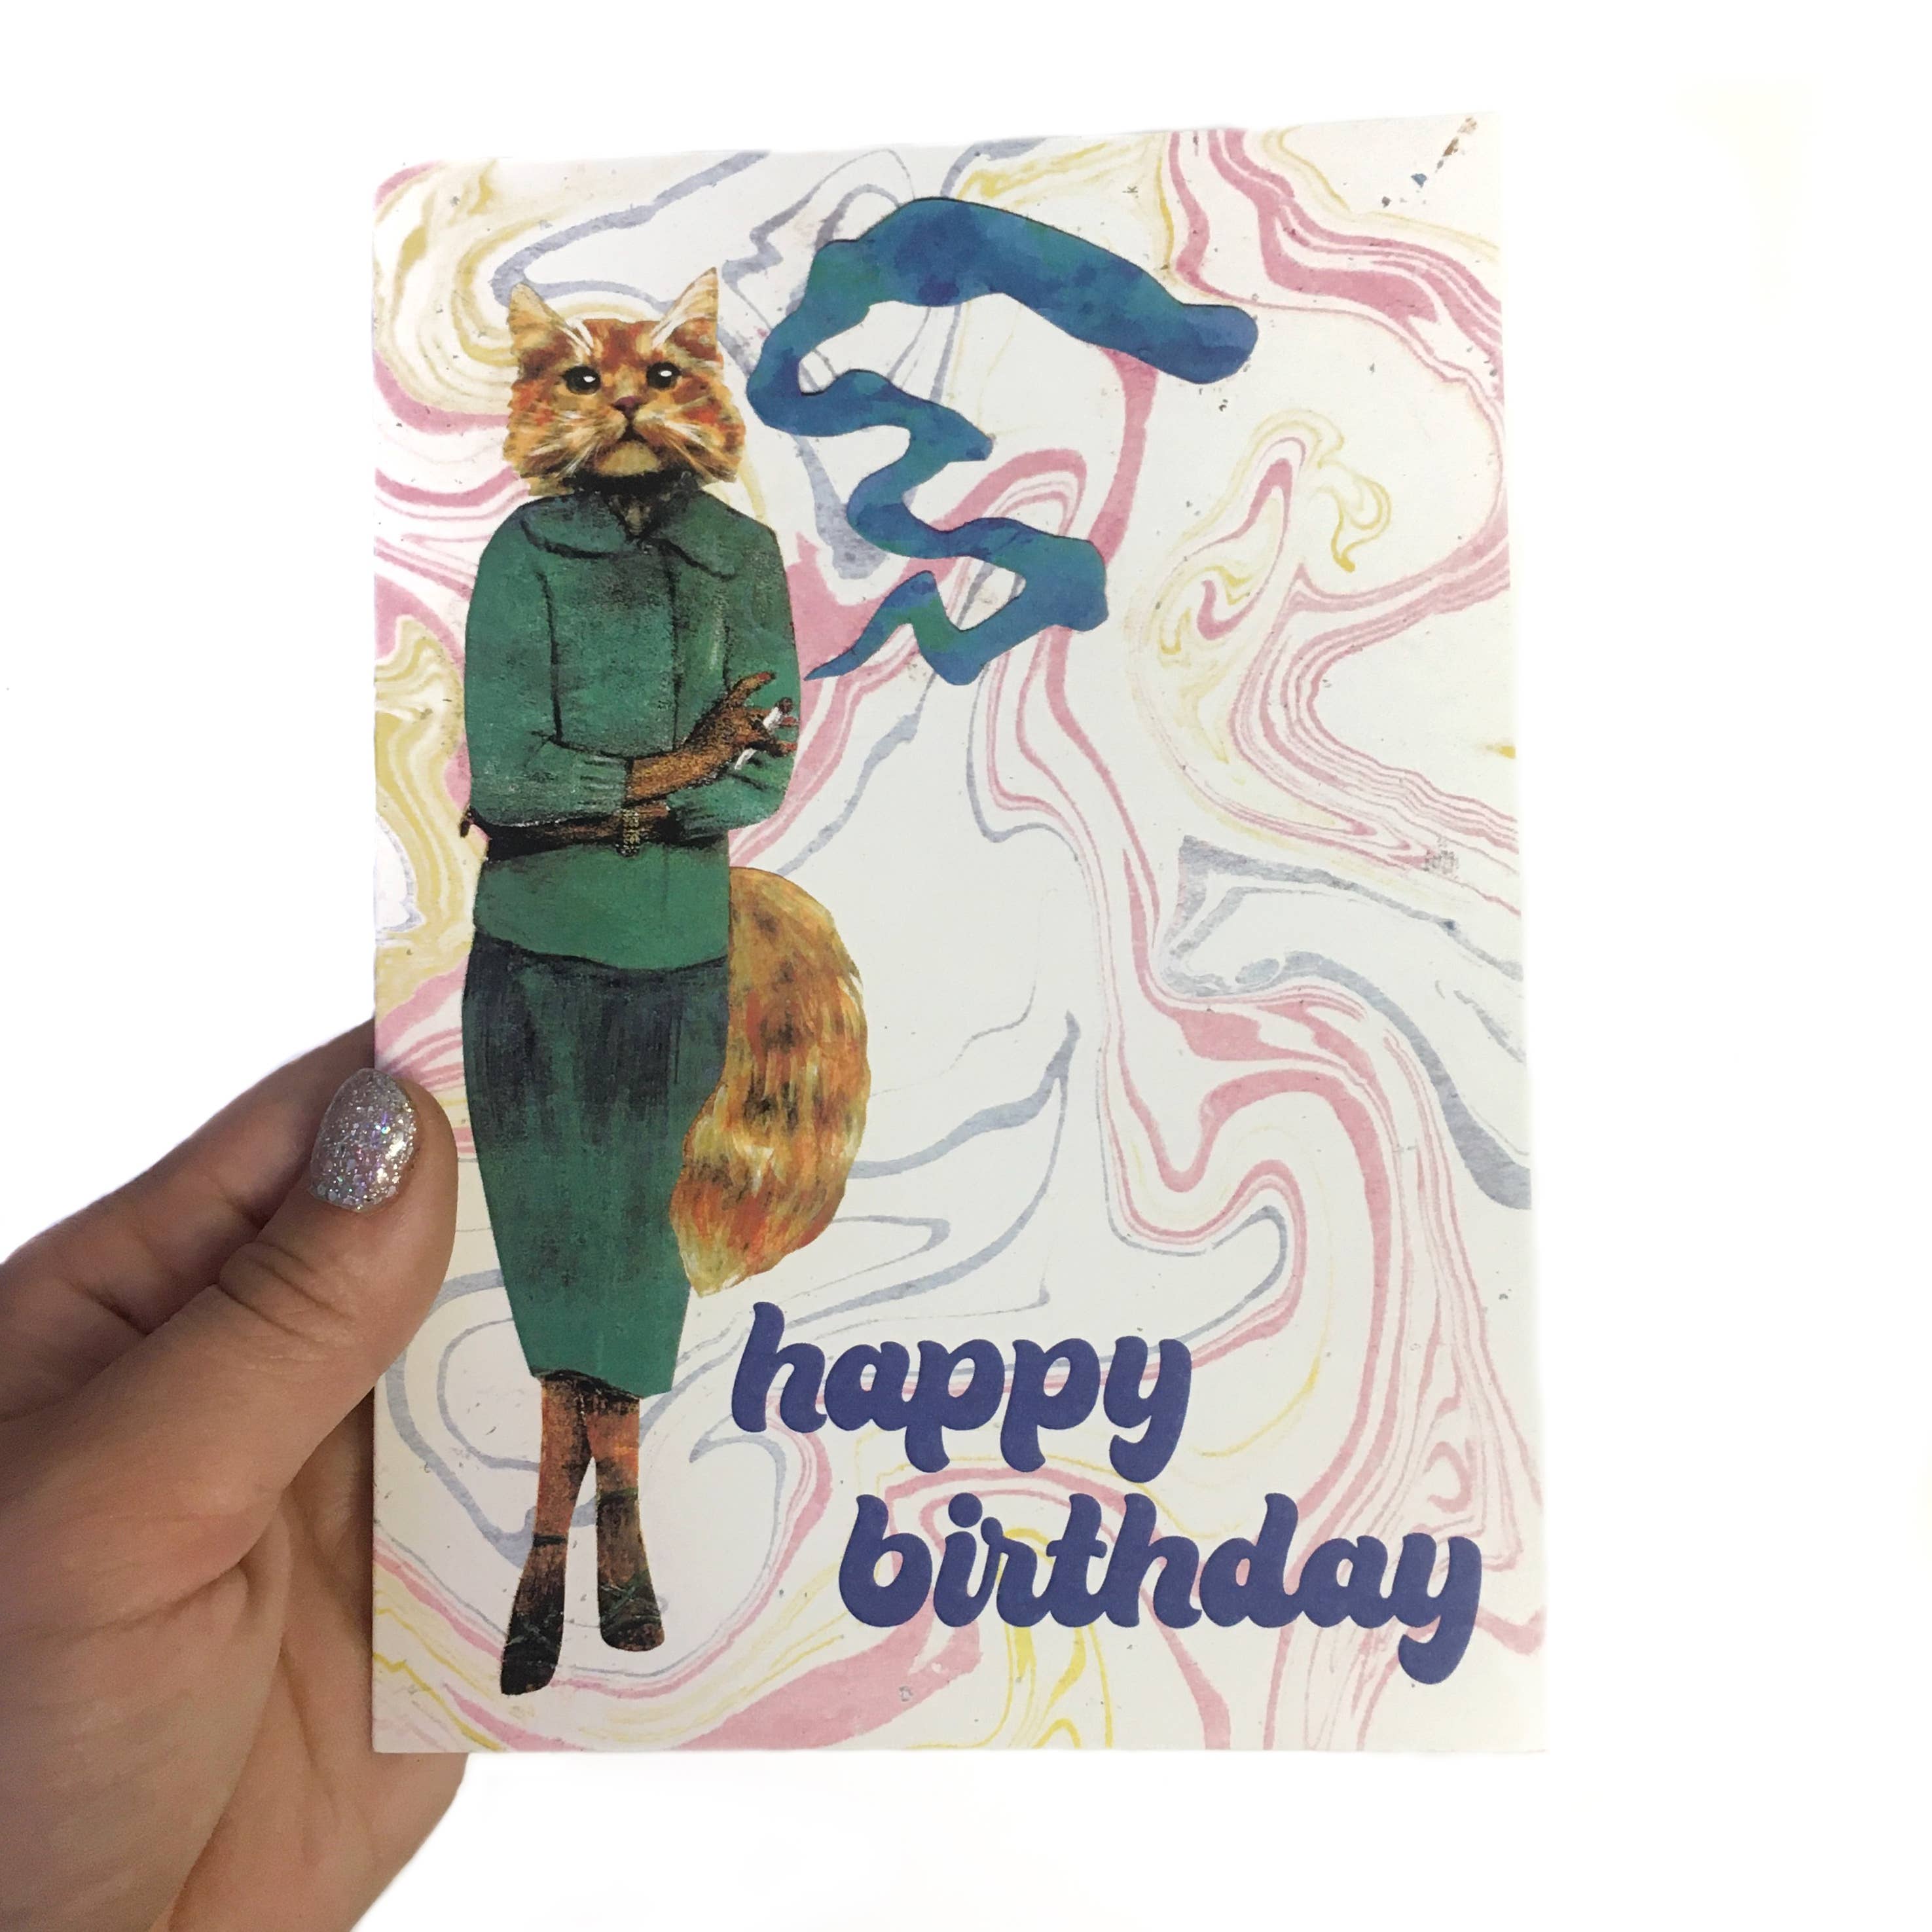 Cannabis Cat Birthday Card - 420 Weed - Weird Cards - Out of the Blue